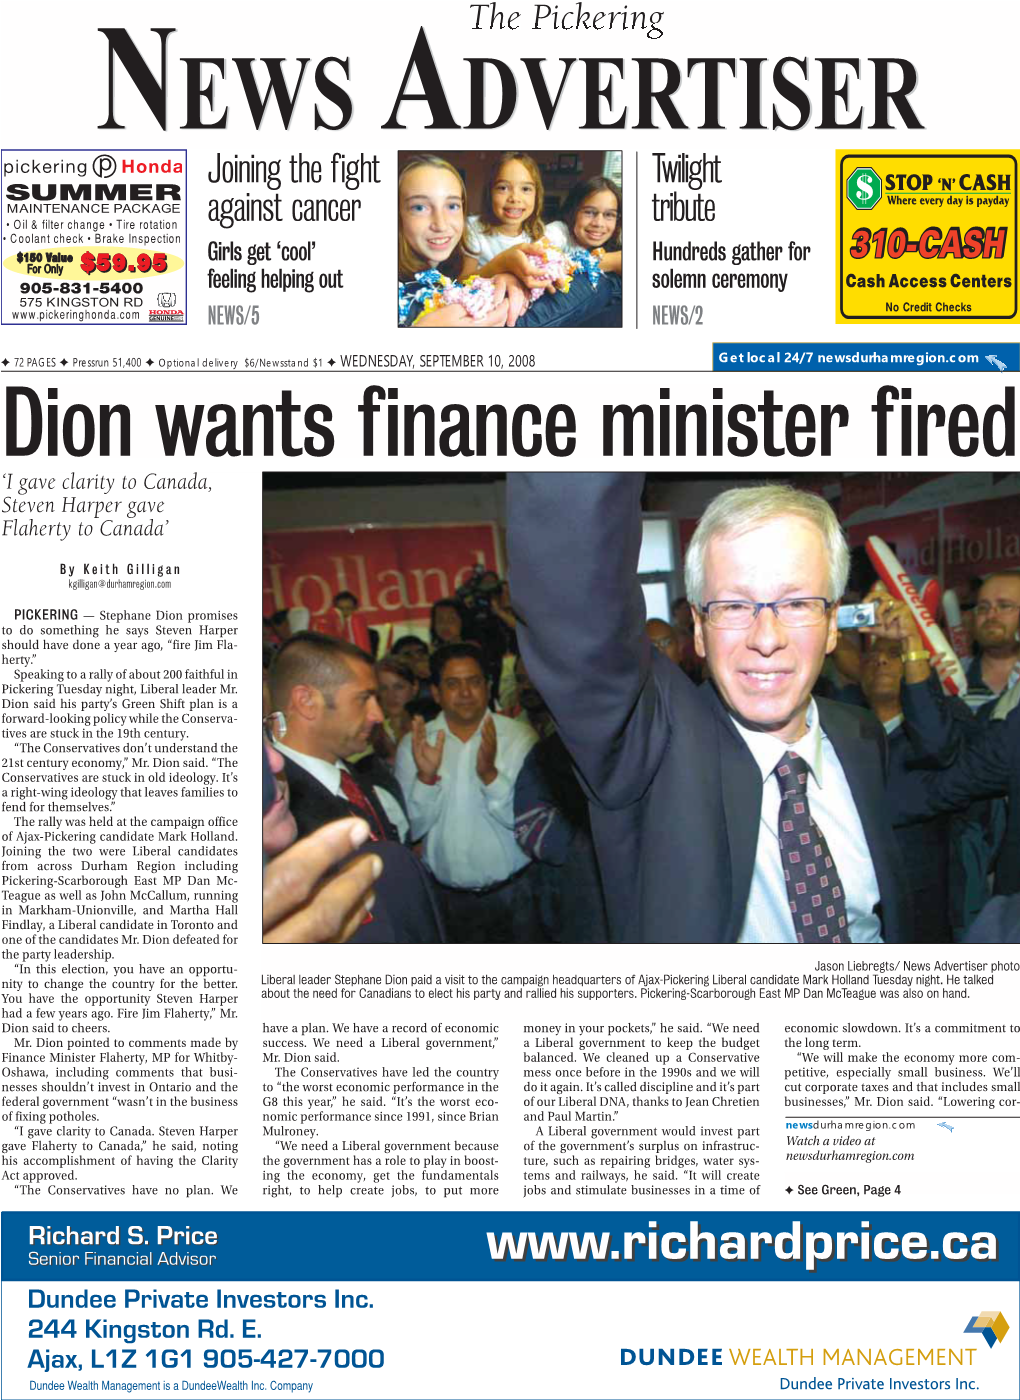 Dion Wants Finance Minister Fired ‘I Gave Clarity to Canada, Steven Harper Gave Flaherty to Canada’